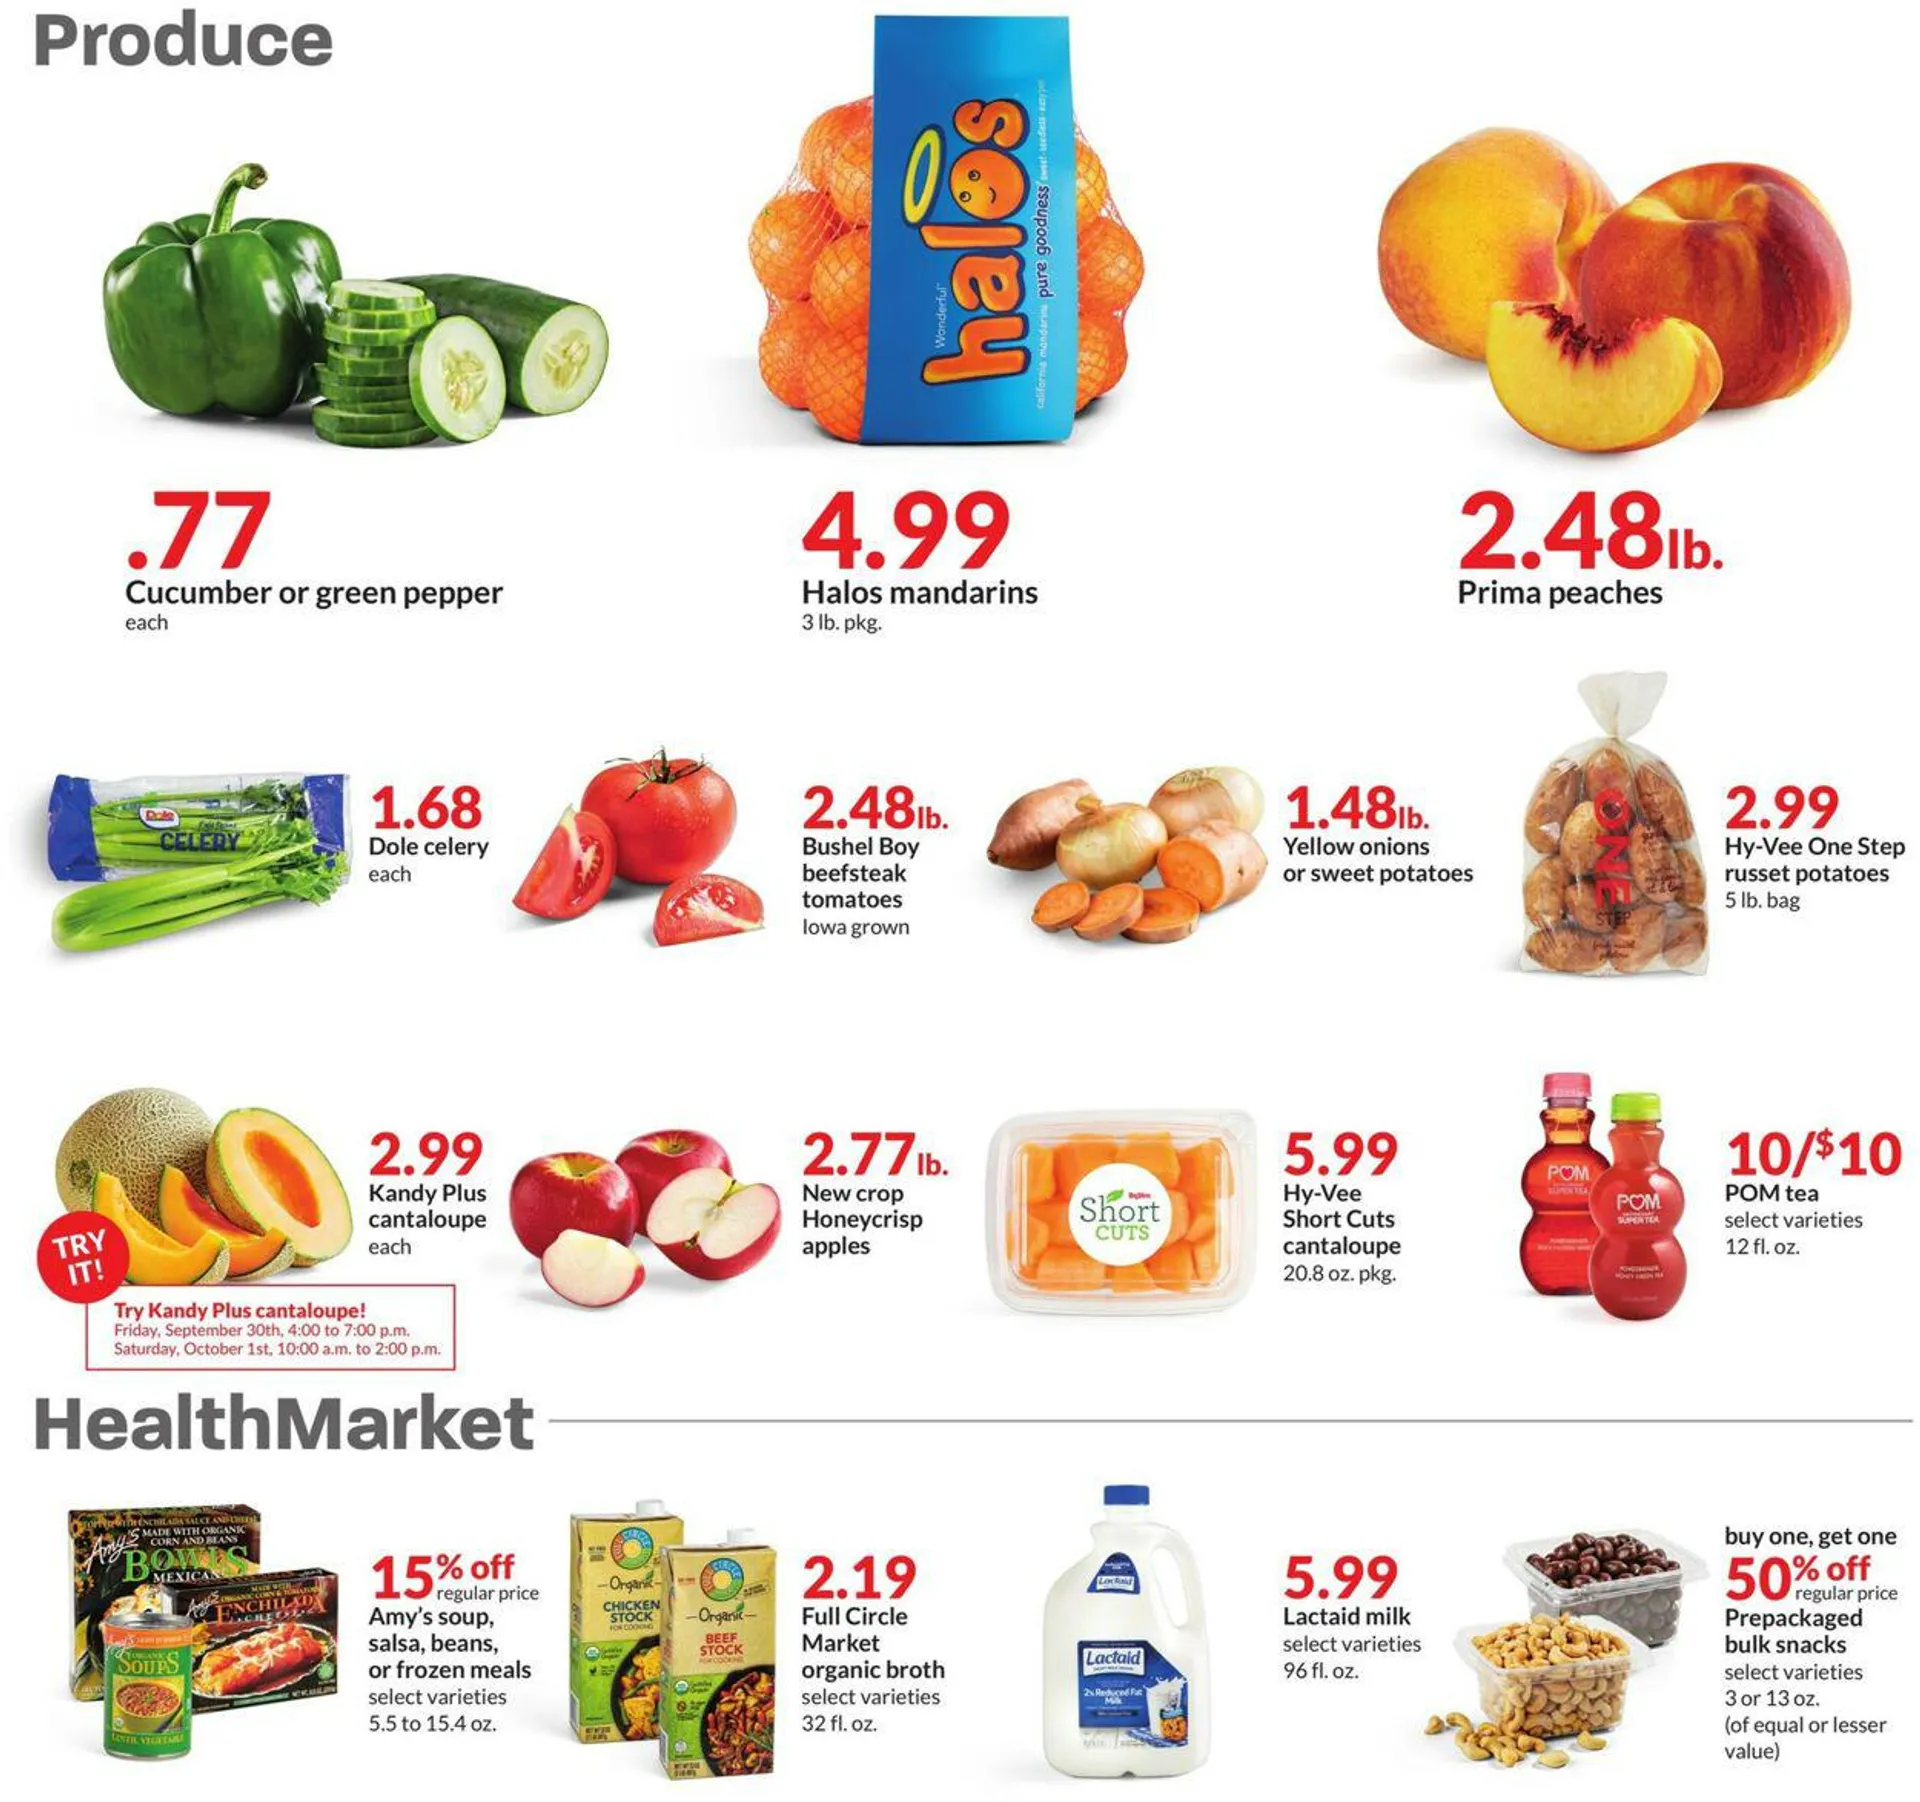 HyVee Current weekly ad - 2